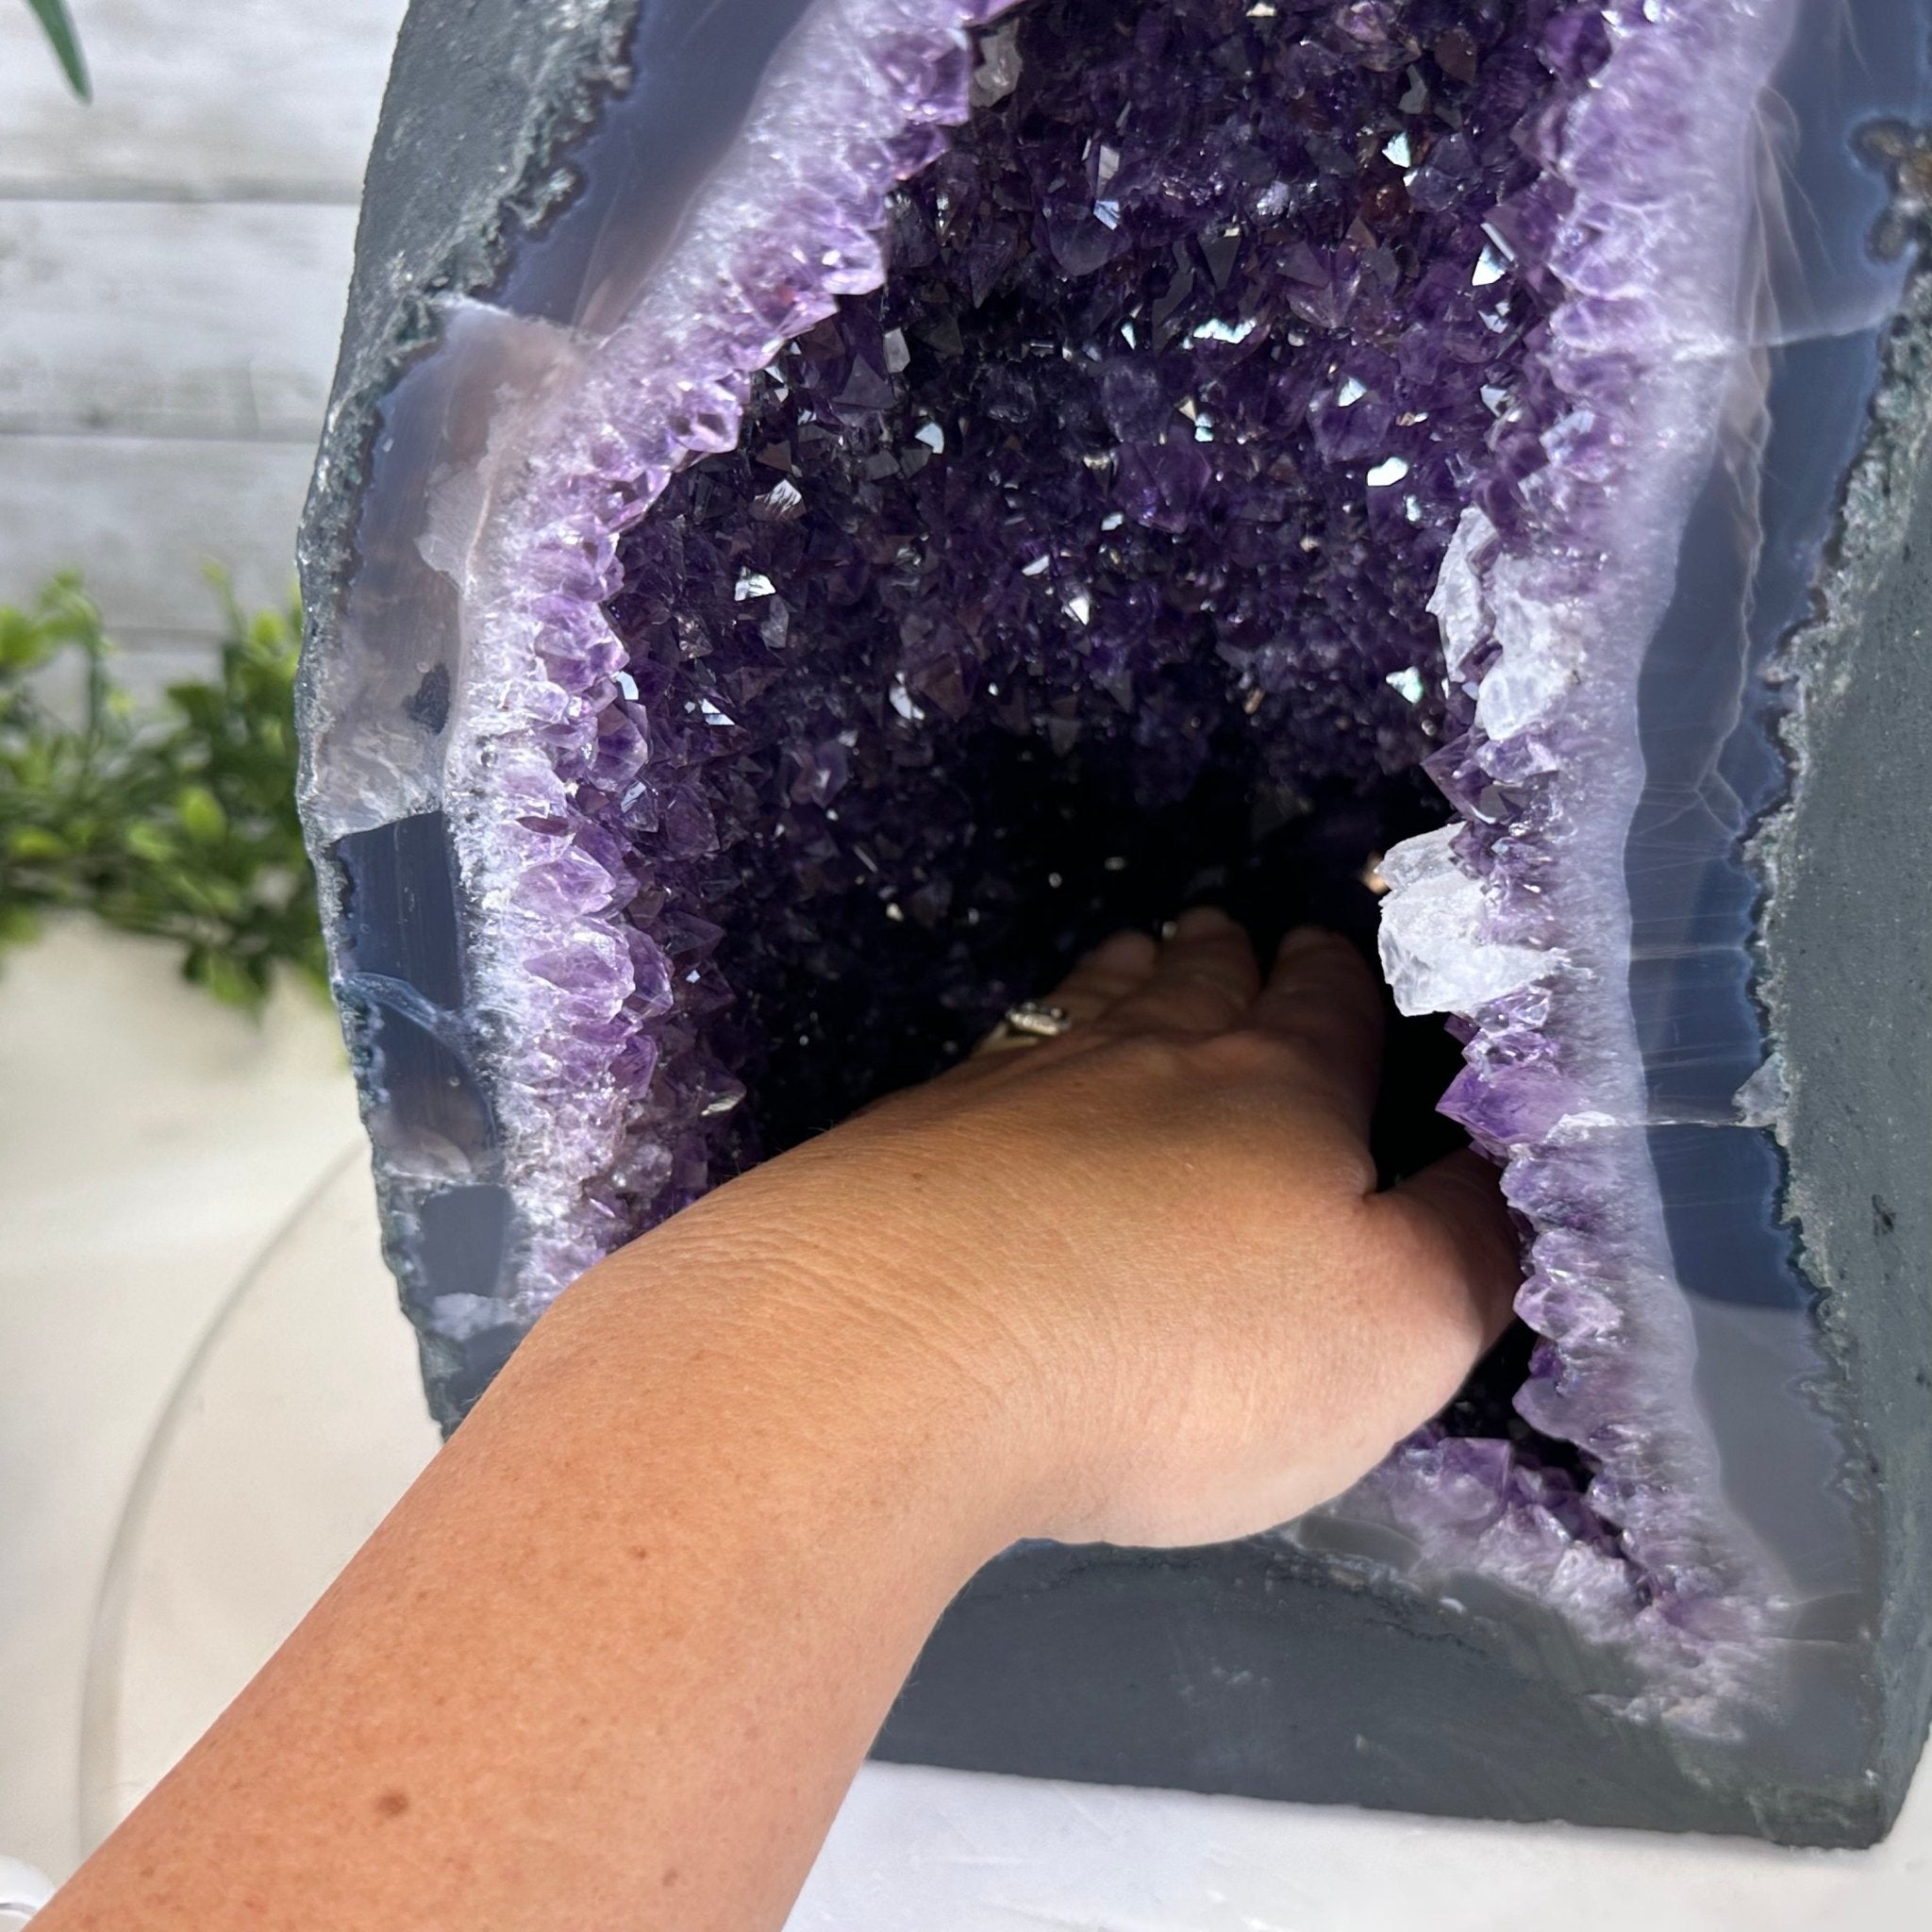 Extra Plus Quality Brazilian Amethyst Cathedral, 33.7 lbs & 14.5" Tall, Model #5601-0877 by Brazil Gems - Brazil GemsBrazil GemsExtra Plus Quality Brazilian Amethyst Cathedral, 33.7 lbs & 14.5" Tall, Model #5601-0877 by Brazil GemsCathedrals5601-0877